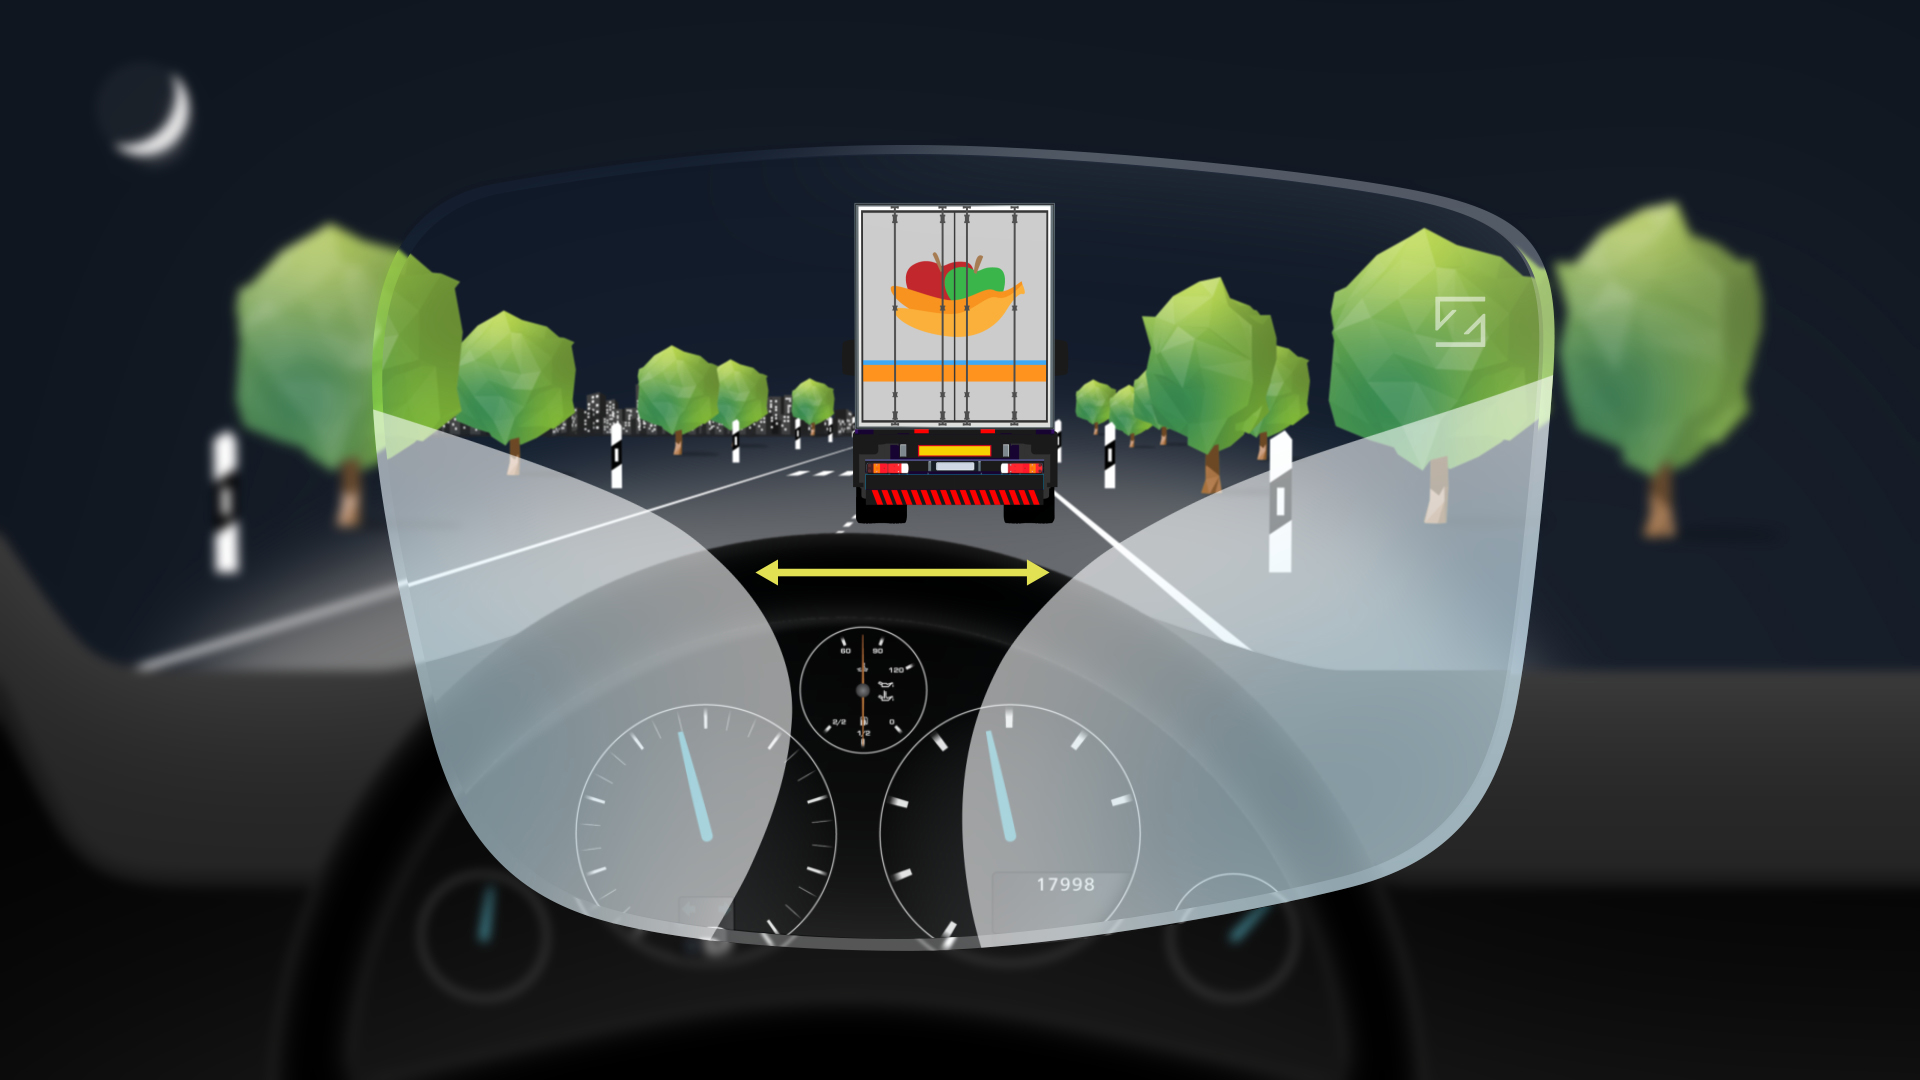 Up to 43% larger mid-distance zone for easier focus switching between dashboard and mirrors. And up to 14% larger far-distance vision zone for a wider view of the road.